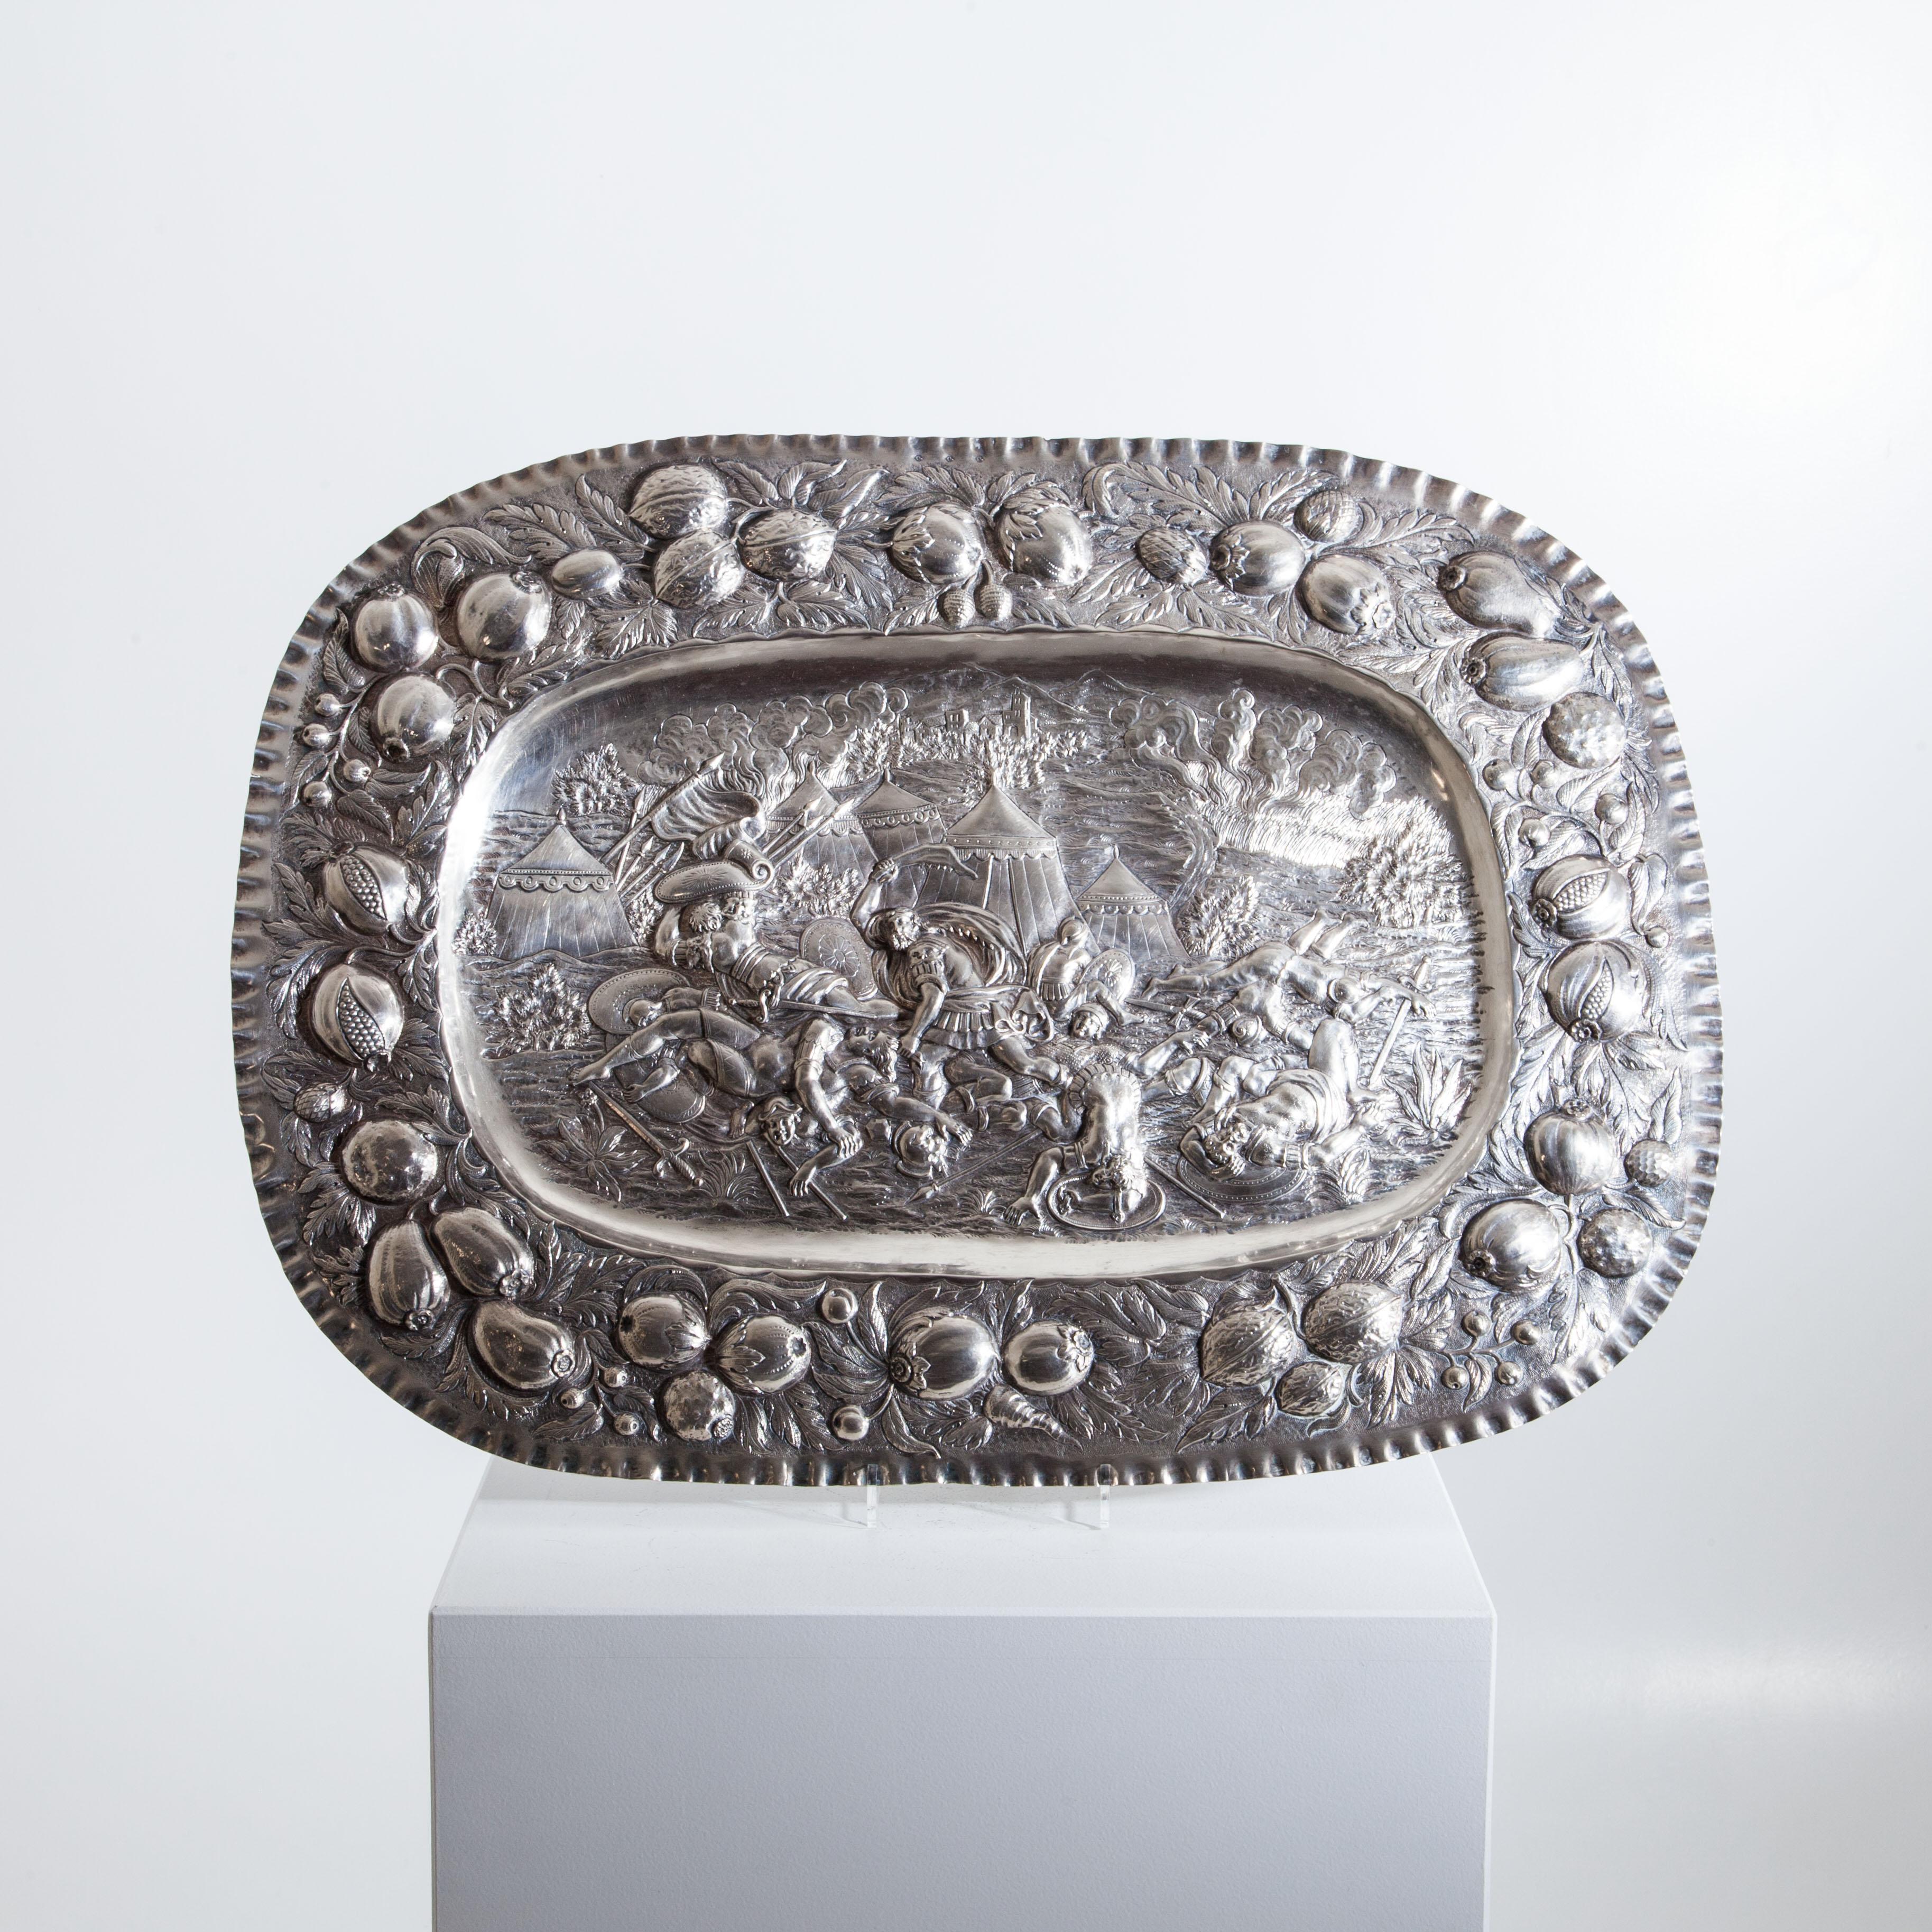 Oval silver plate with embossed nut and fruit decoration on the rim and detailed, dramatic battle scene in the mirror, probably depicting Samson slaying a Philistine.
    